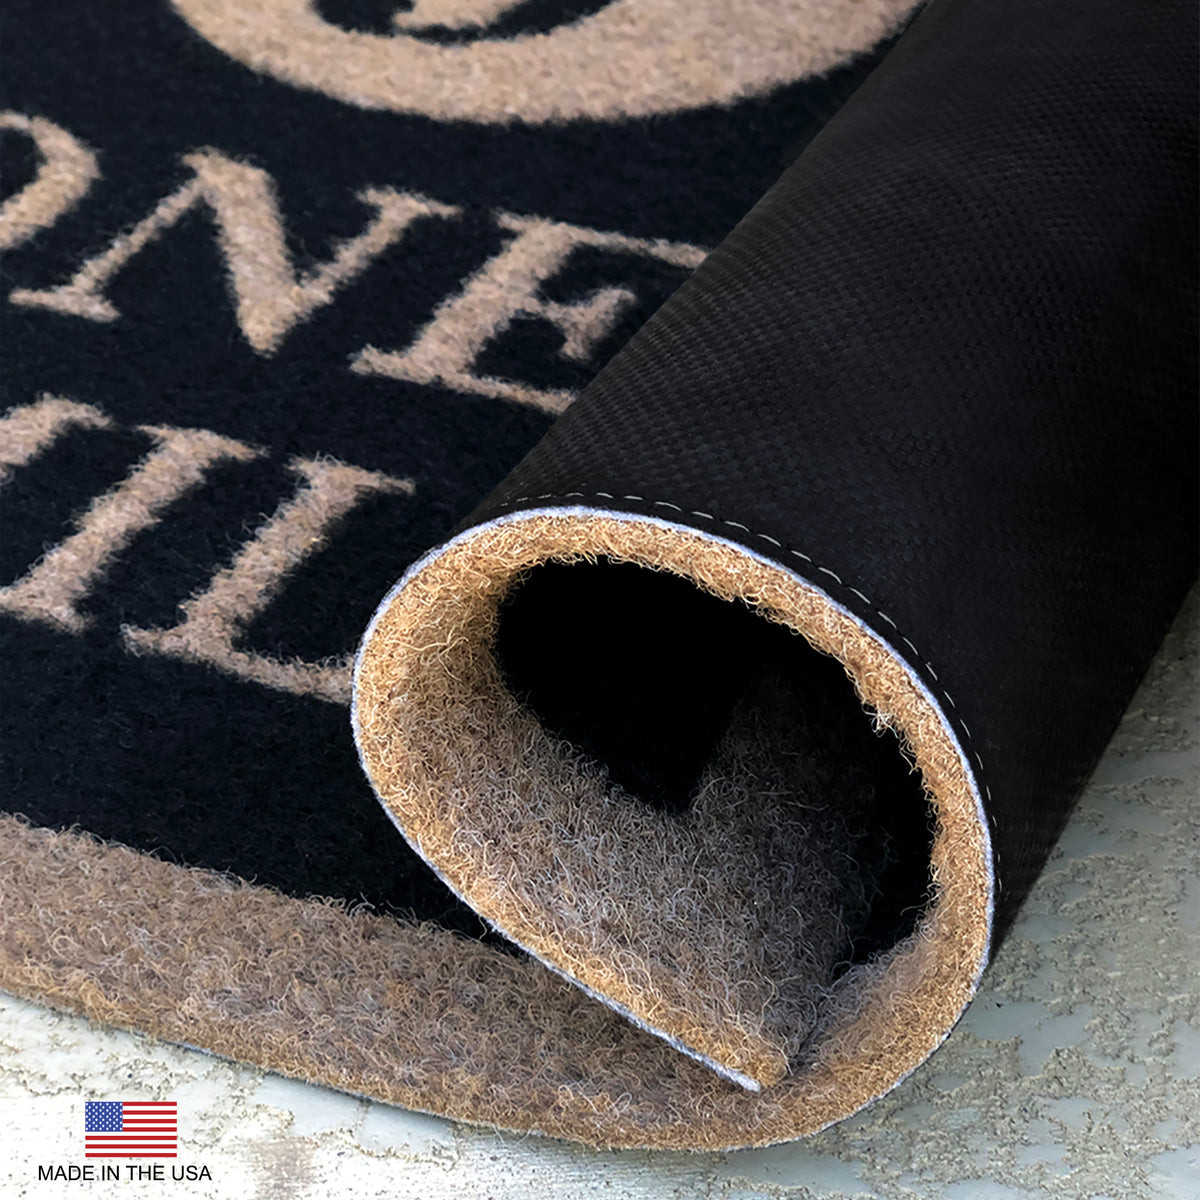 Infinity Custom Mats™ All-Weather Door Mat - STYLE: VINTAGE KEY WELCOME COLOR:TAN - rugsthatfit.com